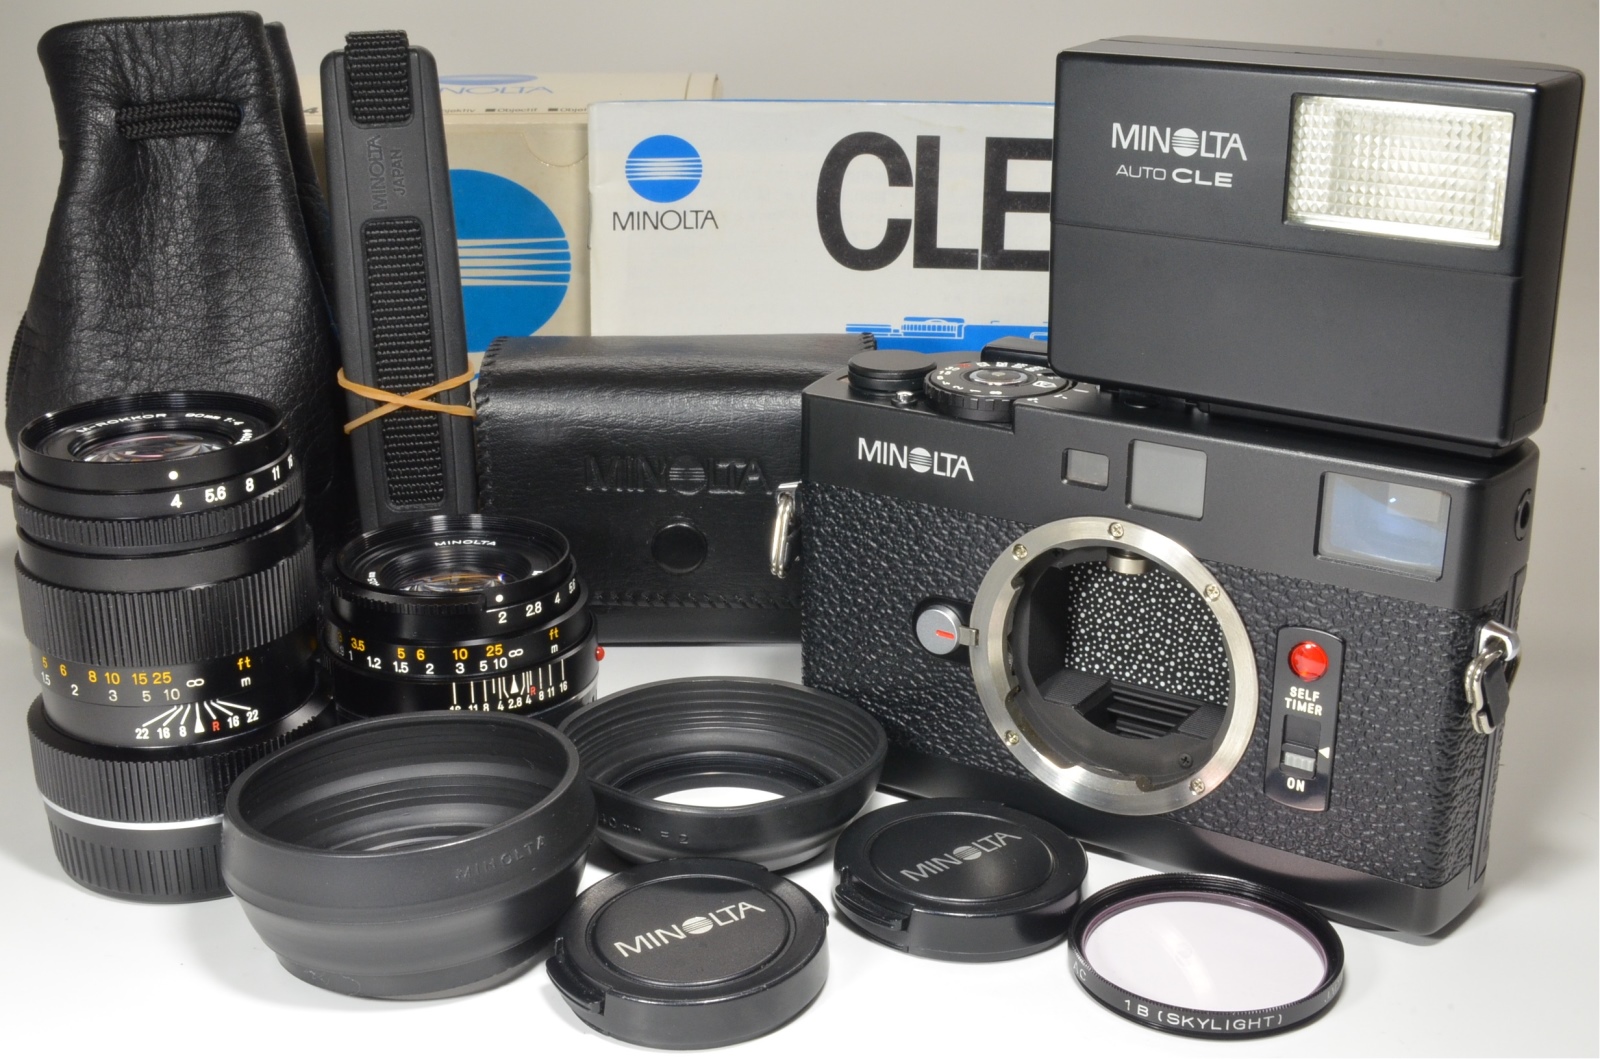 minolta cle 35mm film camera with lens m-rokkor 40mm f2, 90mm f4 and flash